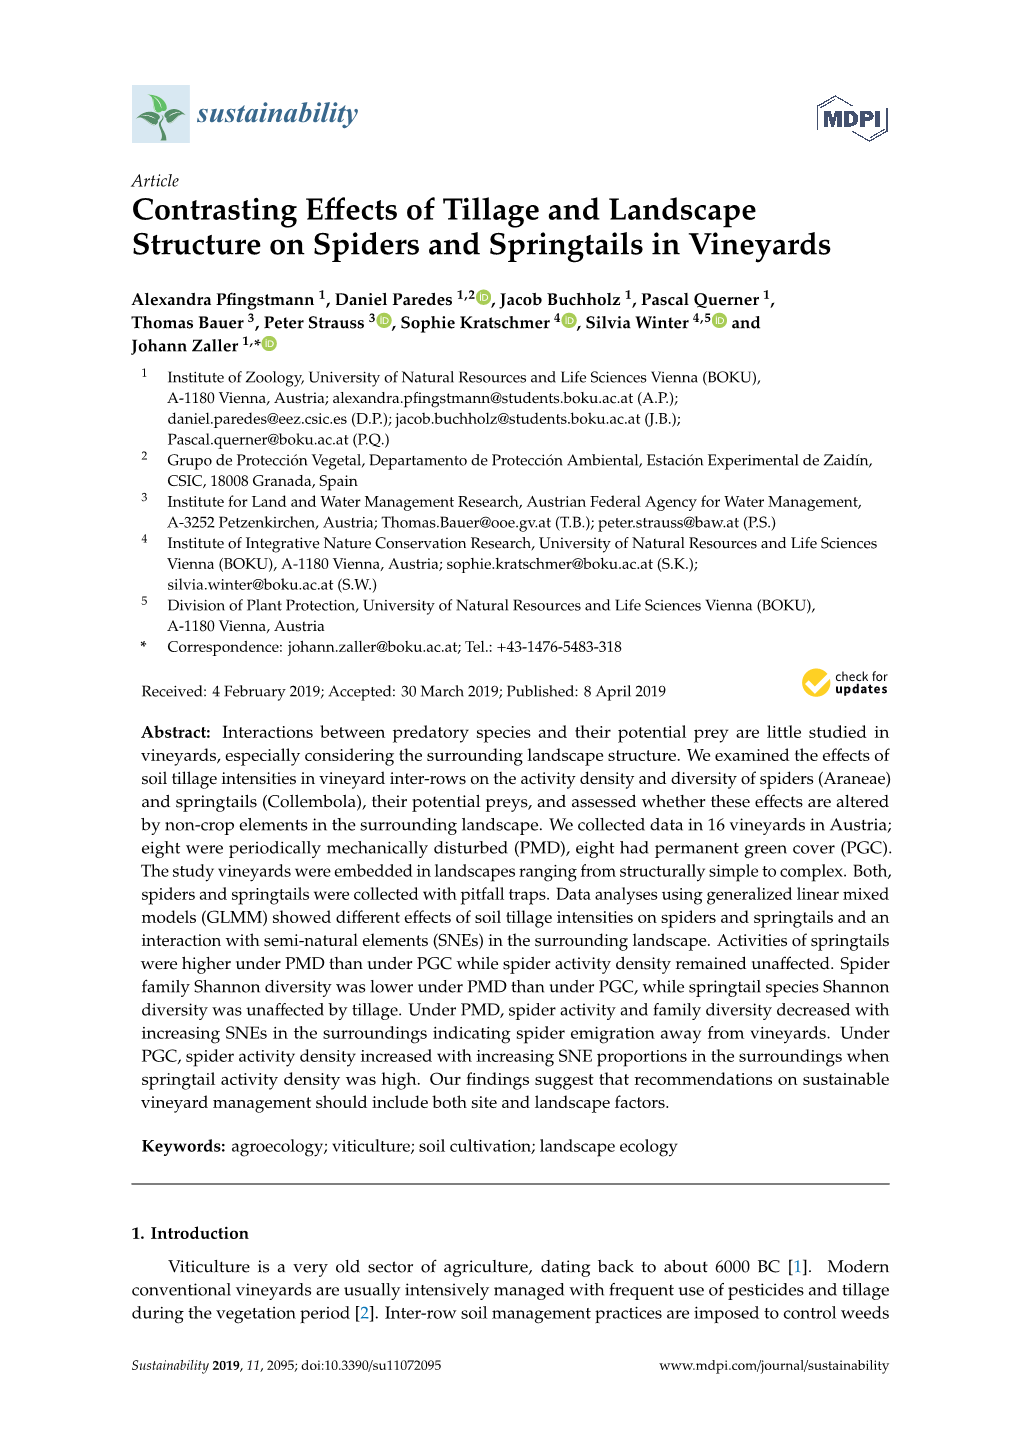 Contrasting Effects of Tillage and Landscape Structure on Spiders